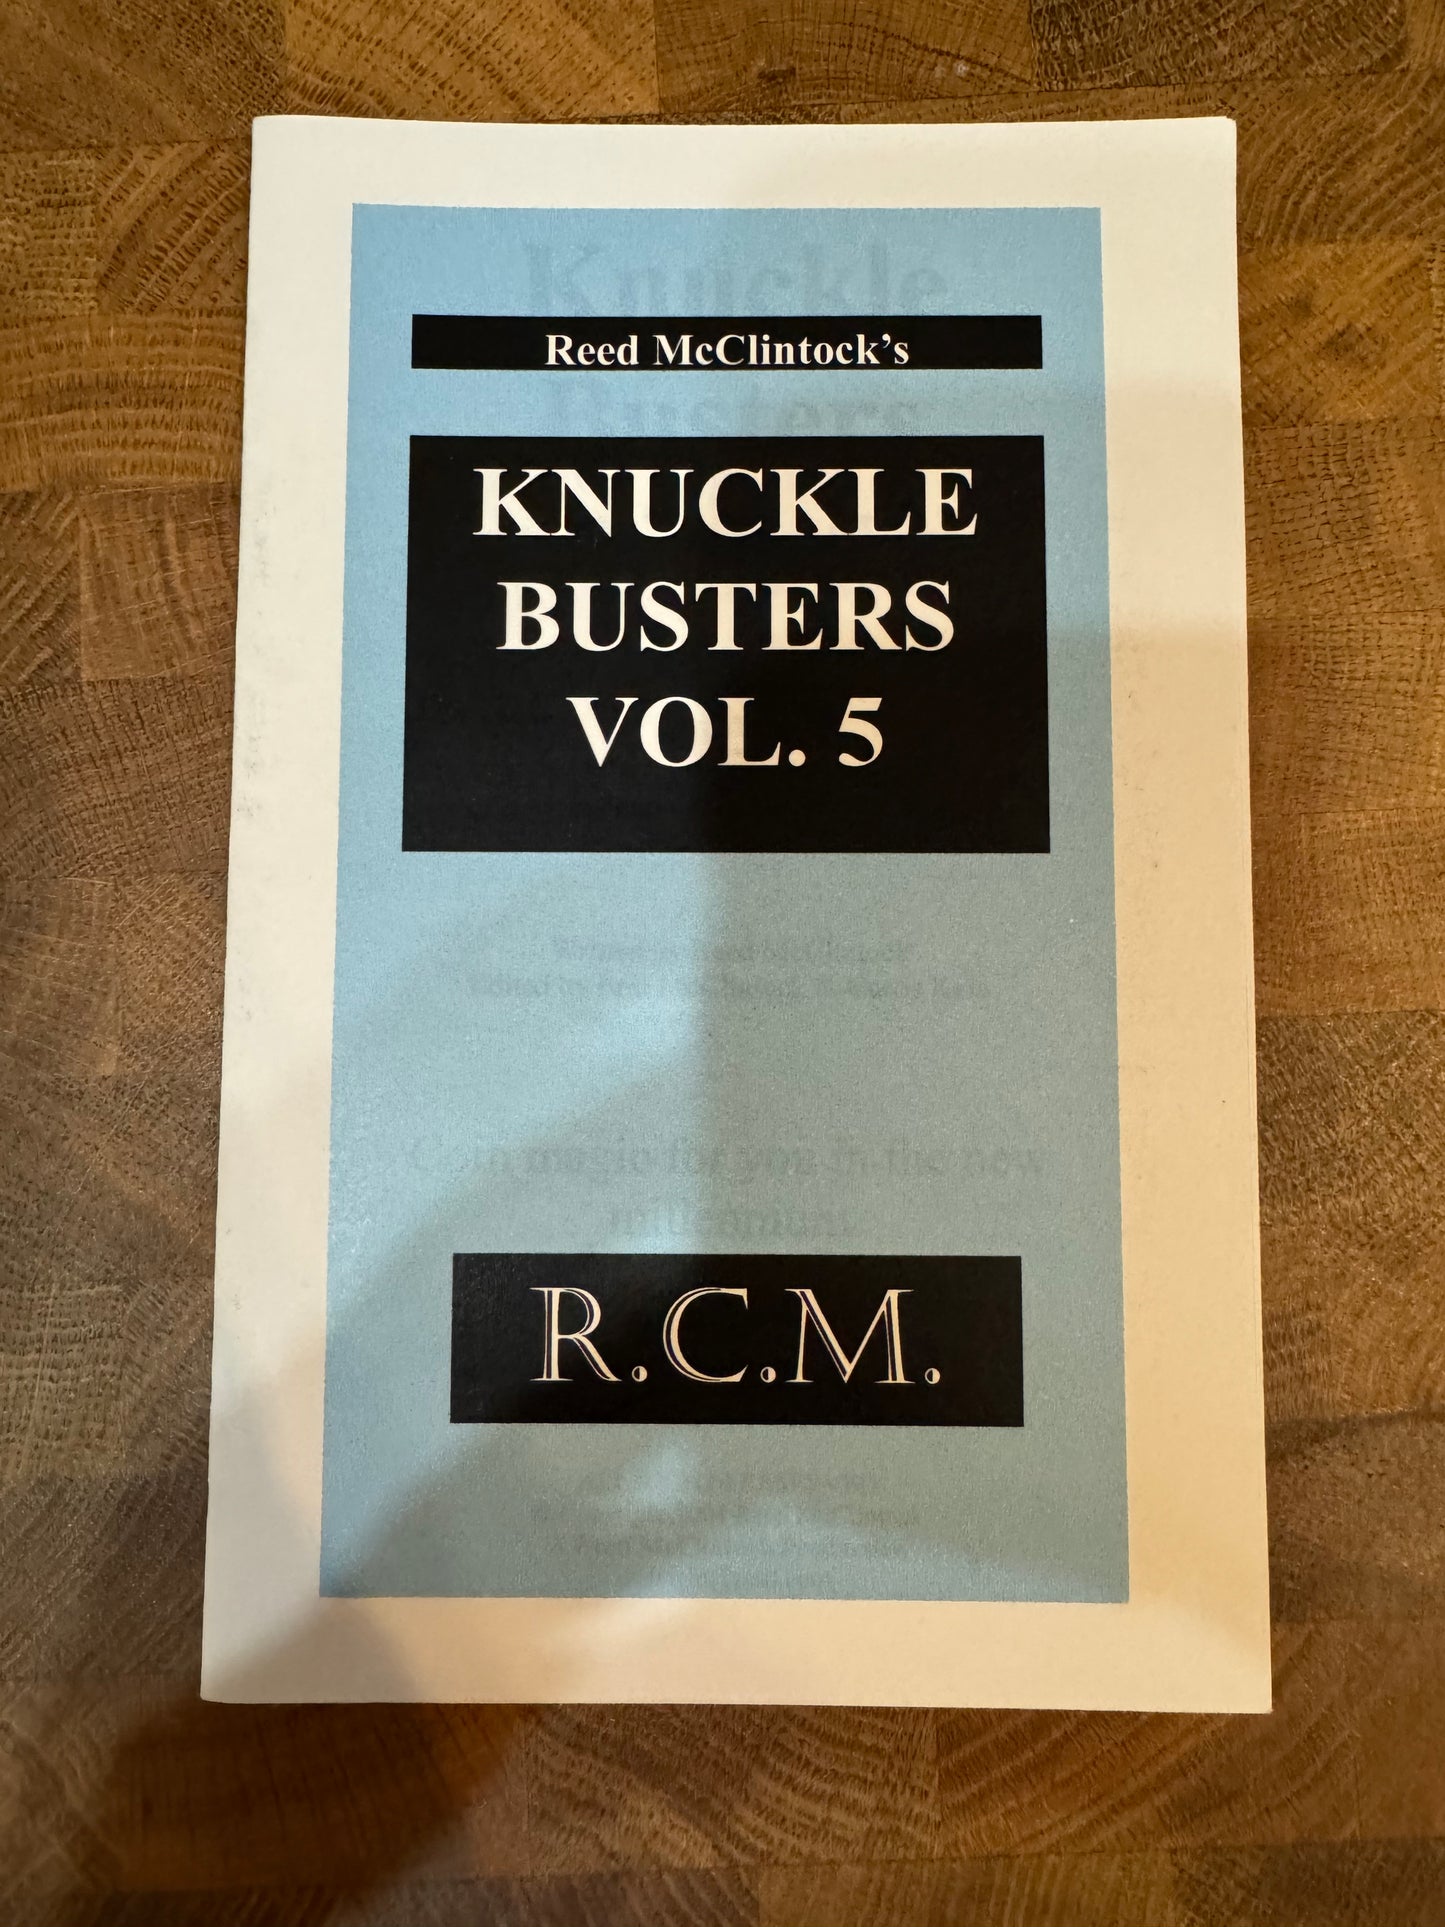 Knuckle Busters Vol. 5 - Reed McClintock